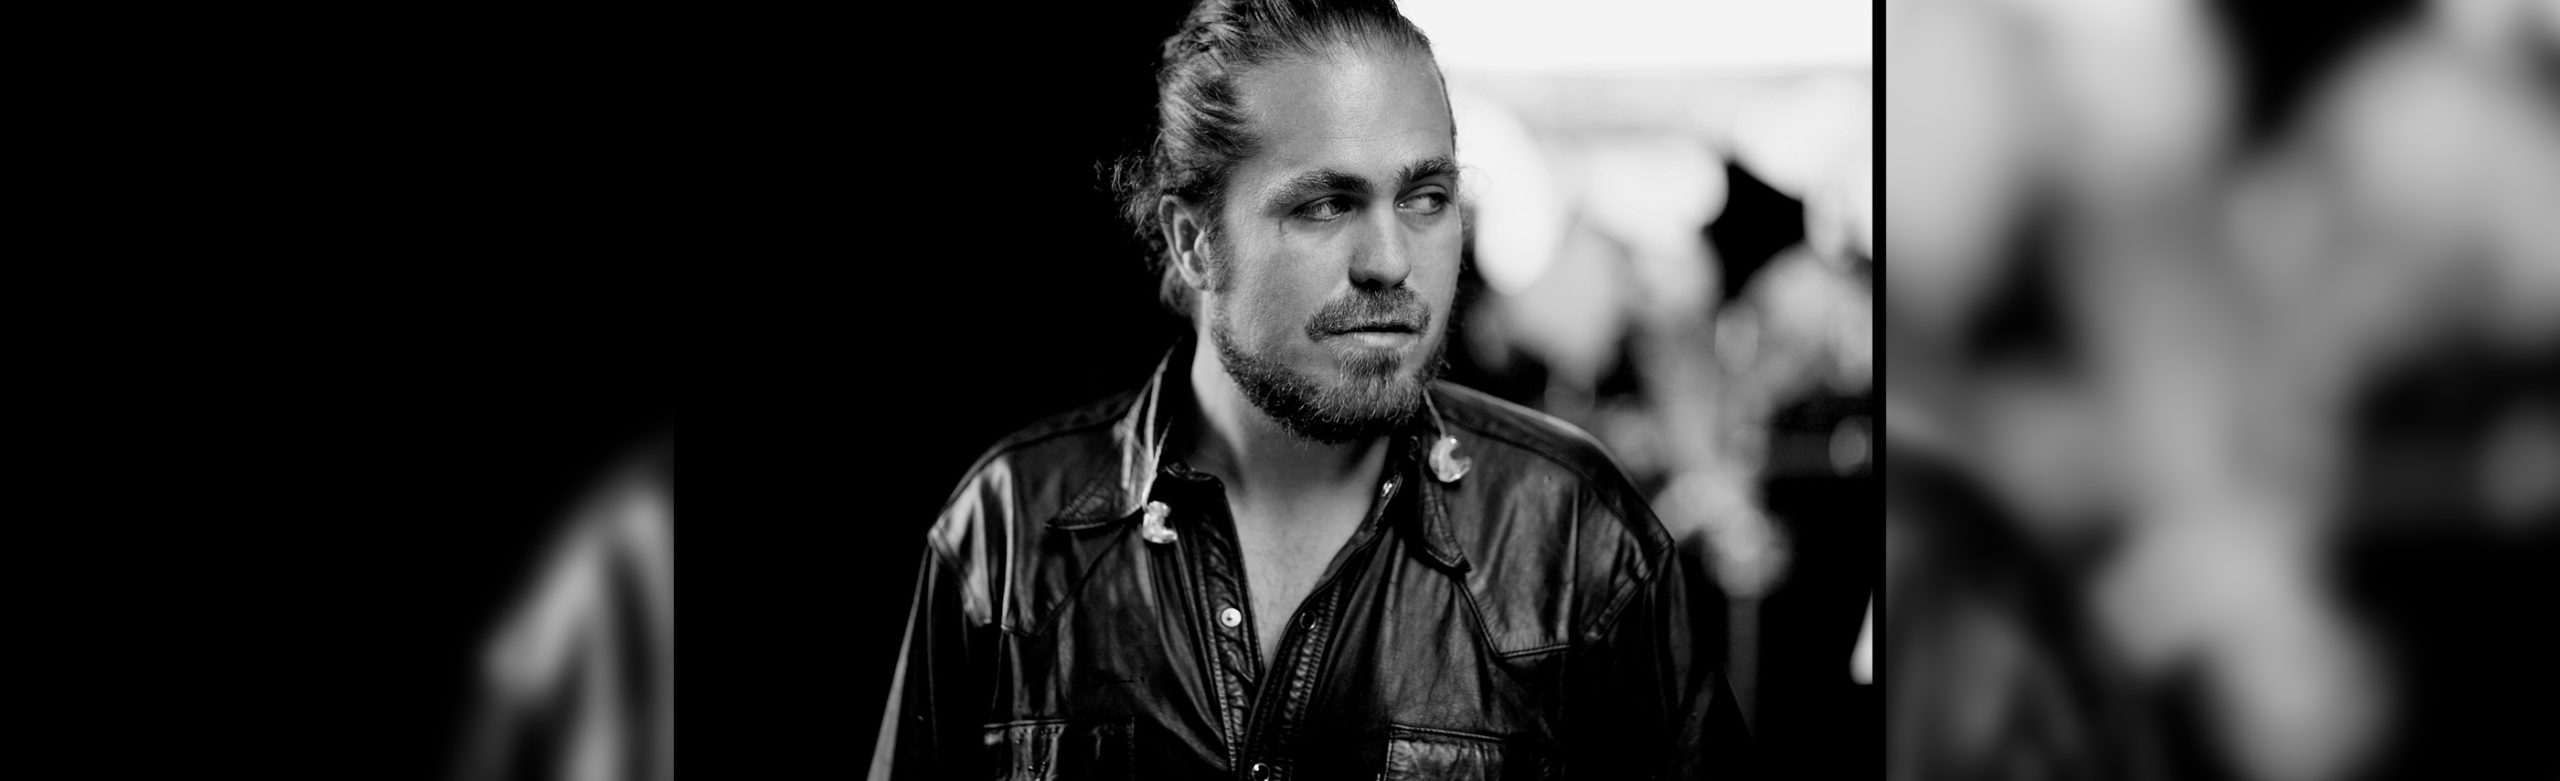 Heroin and Helicopters: Citizen Cope Will Bring Album Release Tour to Missoula Image